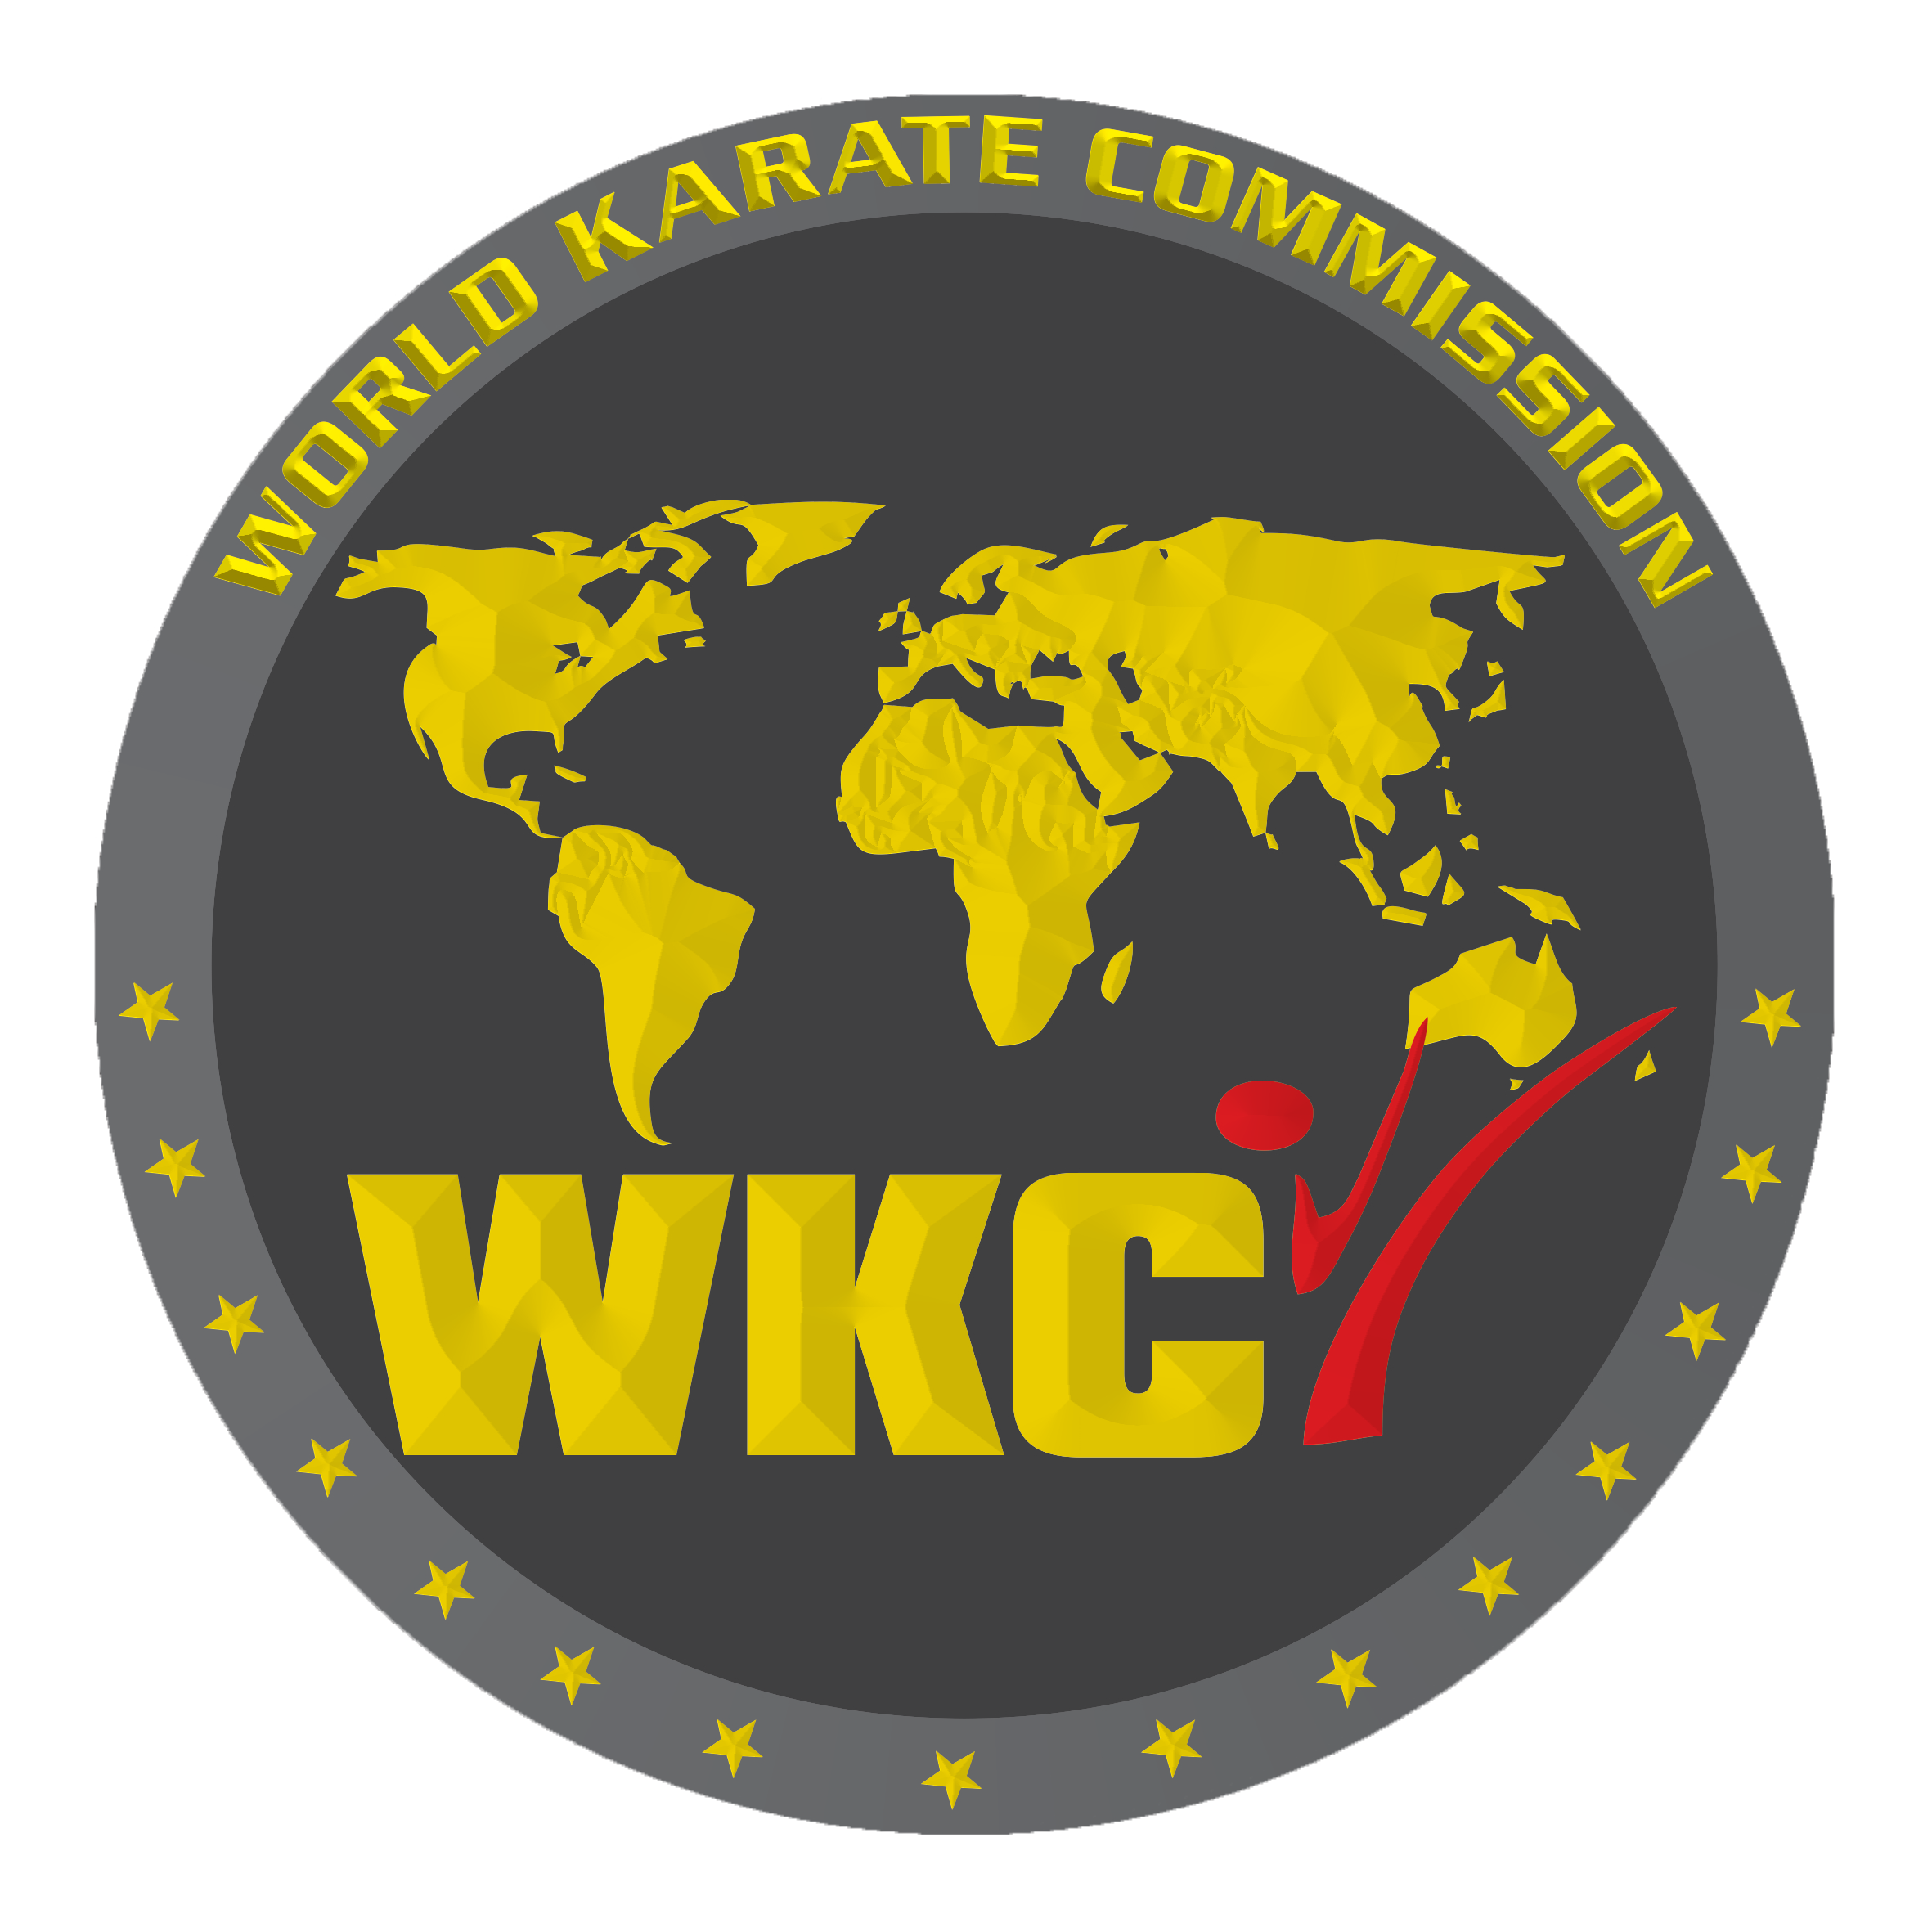 wkc-Commission-new-logo-circle.png